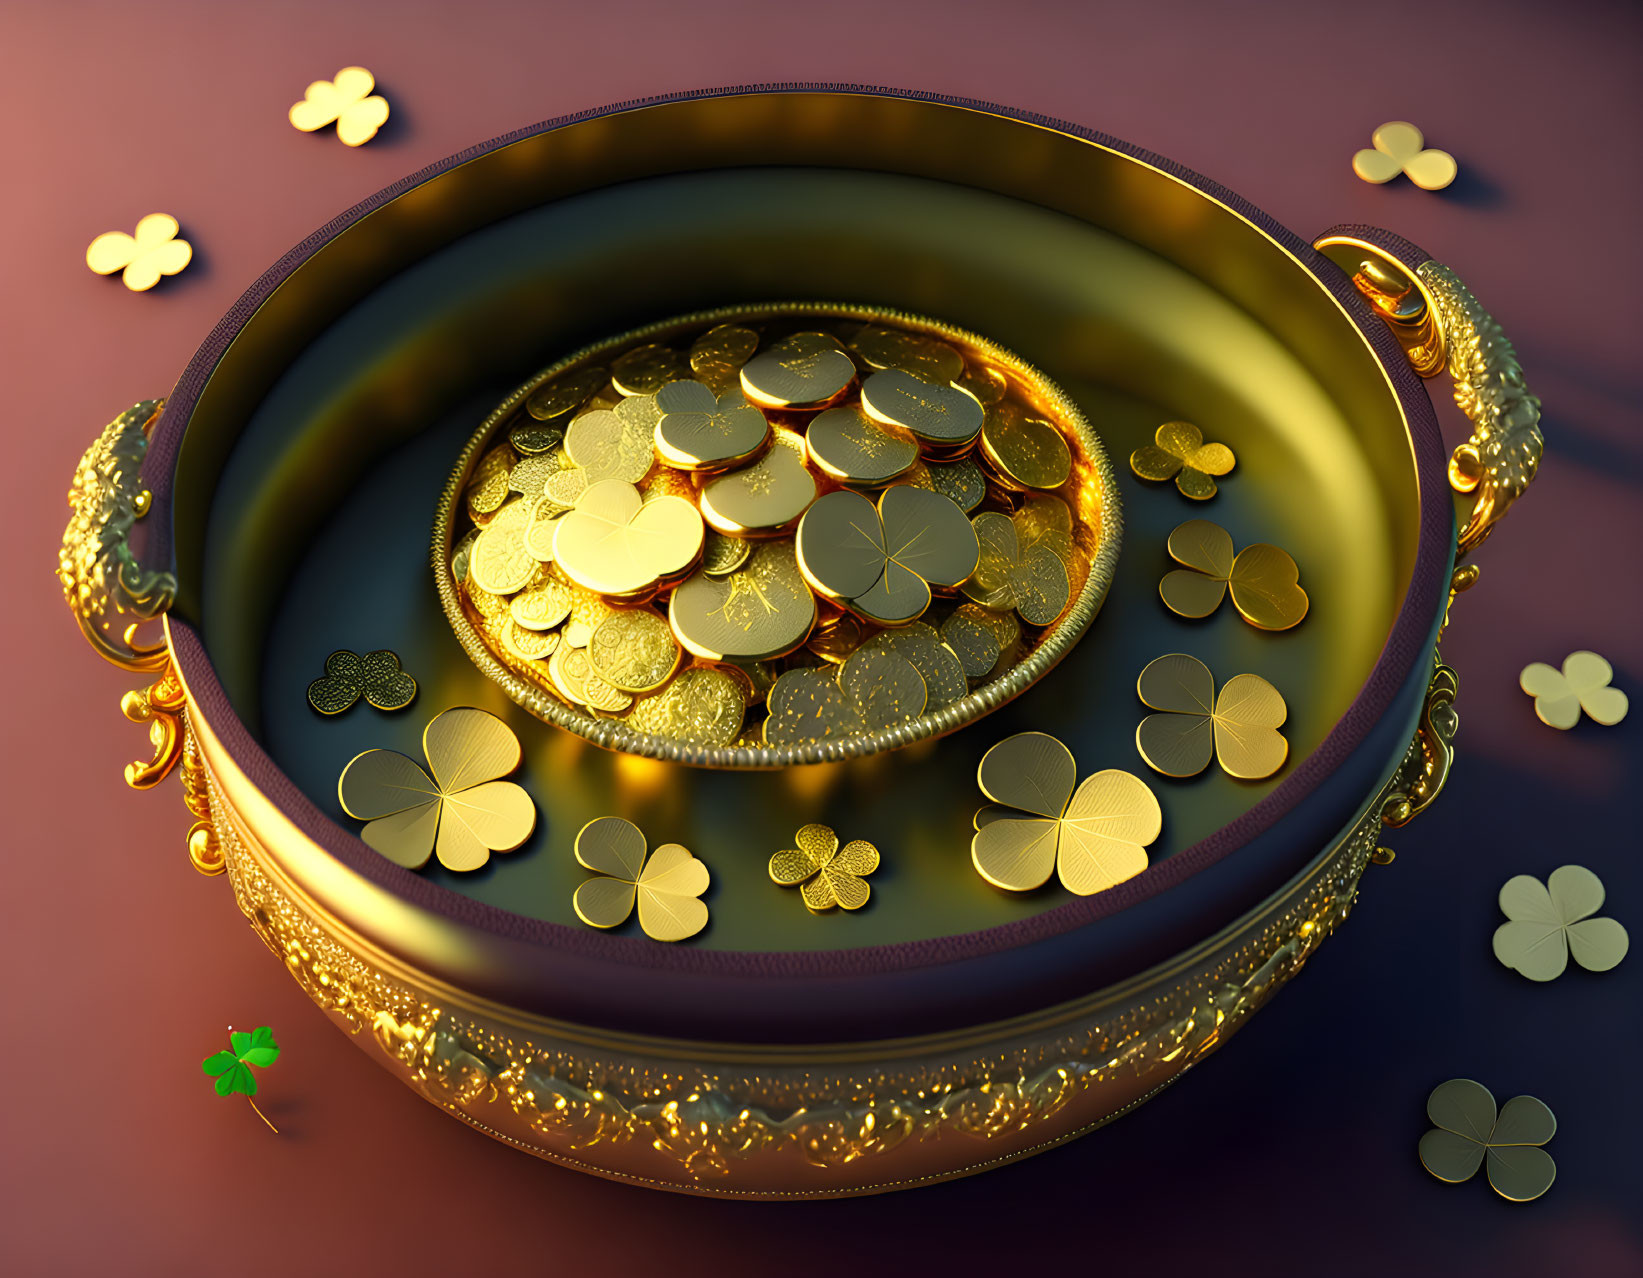 Decorative bowl with gold coins and clovers on reflective surface